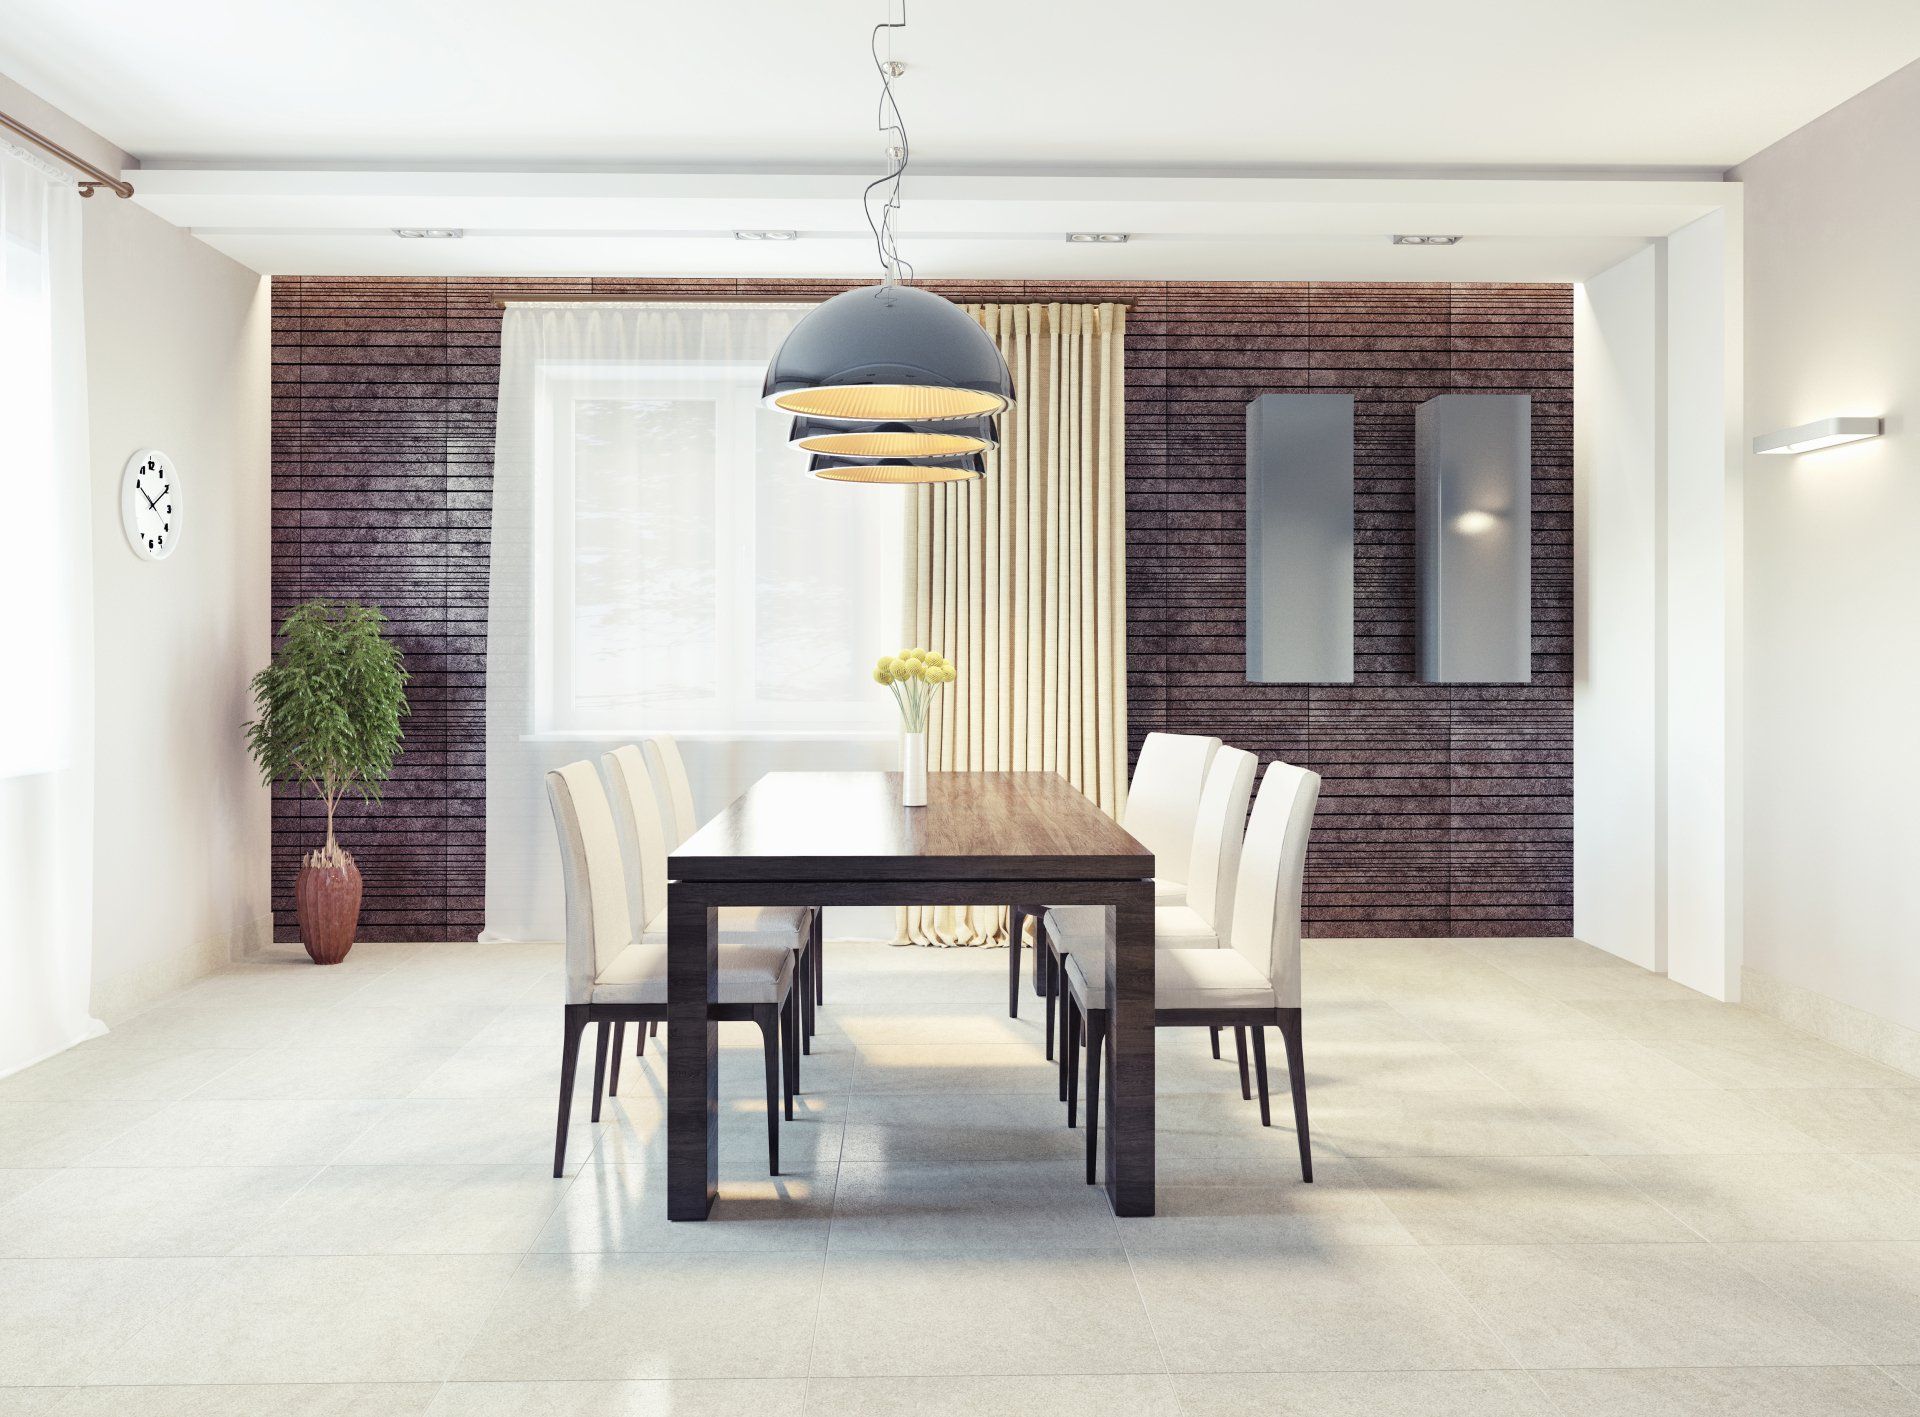 Modern minimalist dining room with formal white high-backed chairs around timber dining table. Dark coloured brick wall with white curtains open half way to reveal sheer under curtain.